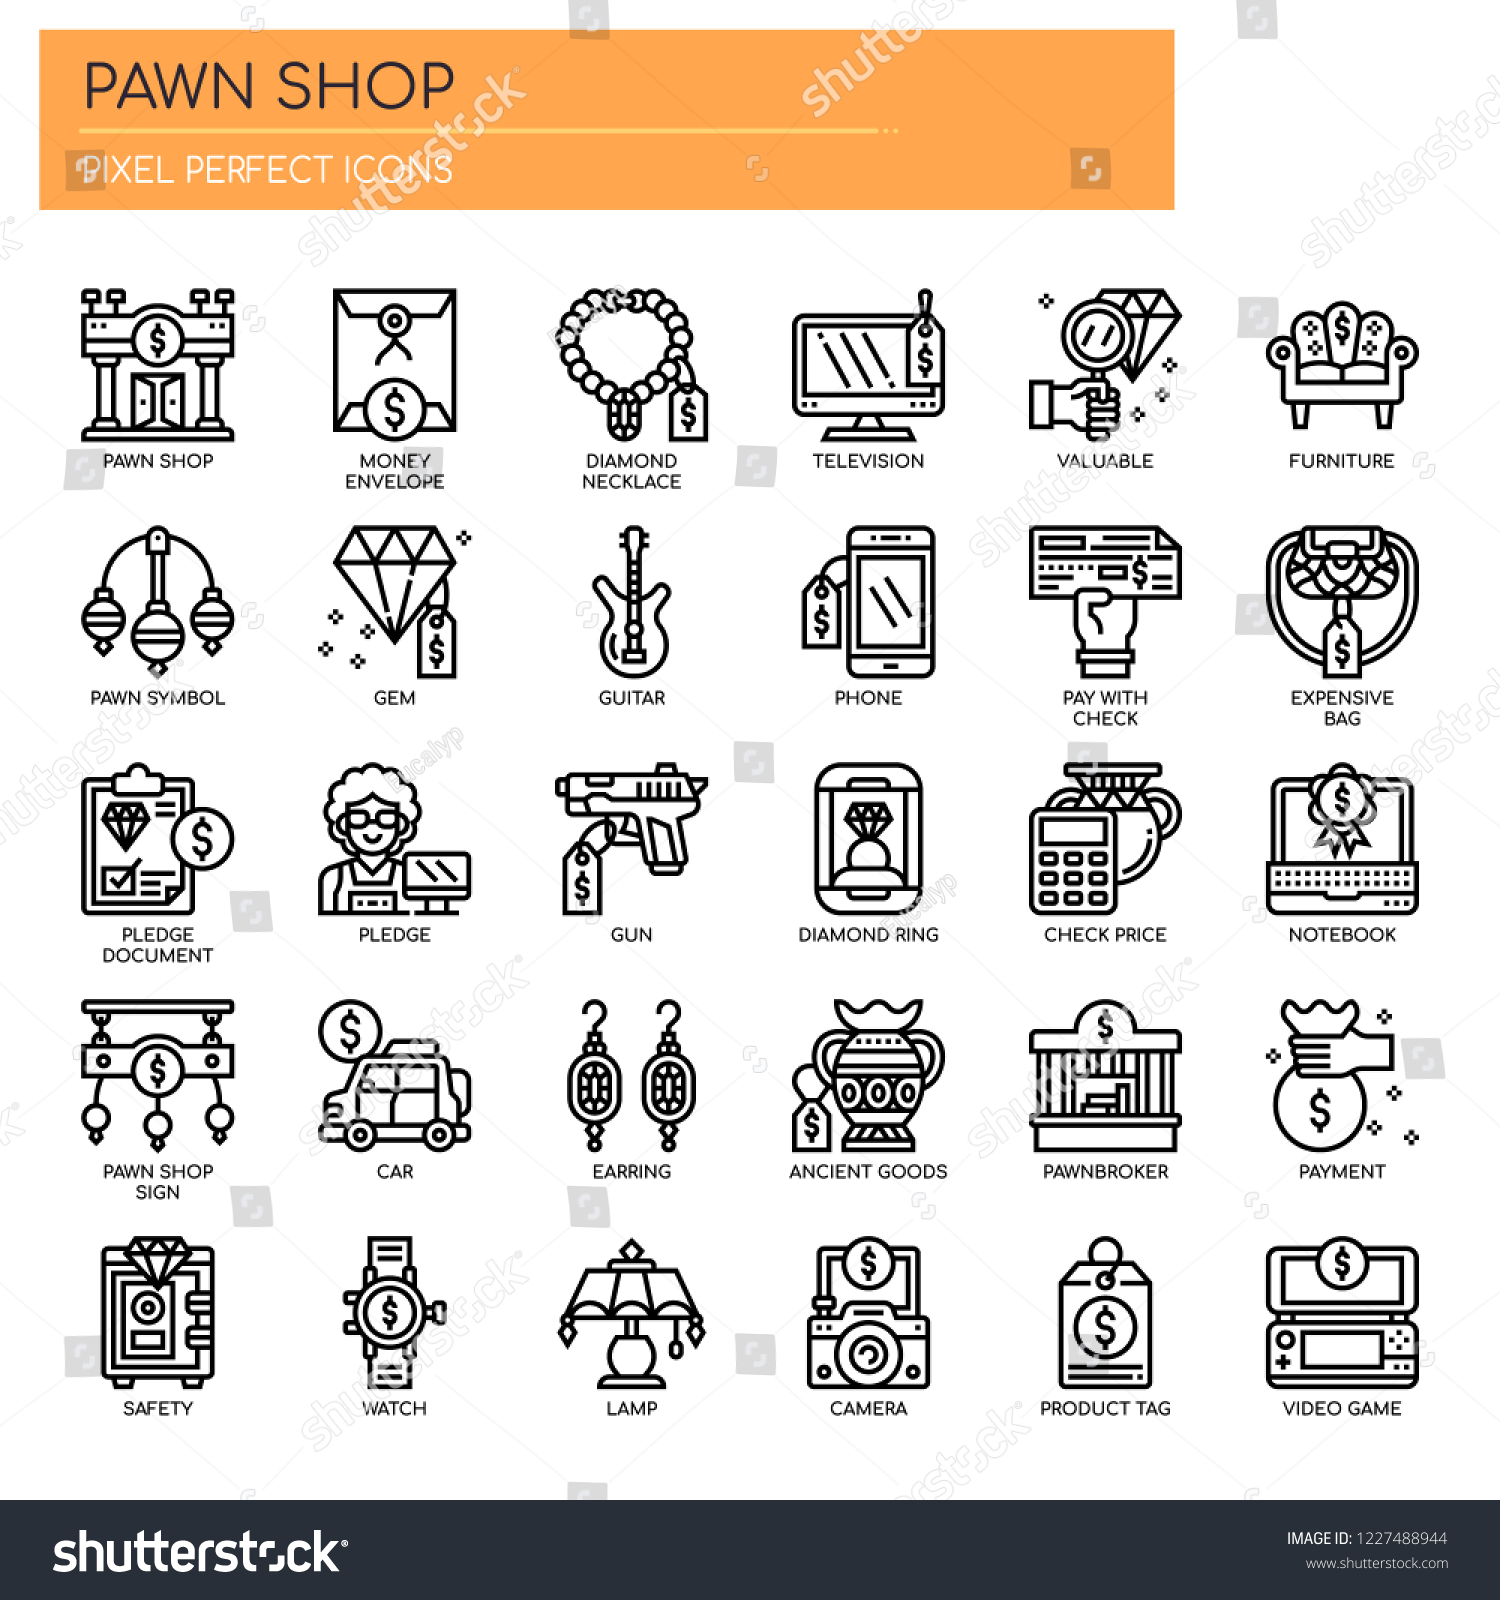 Pawn Shop Thin Line Pixel Perfect Stock Vector Royalty Free